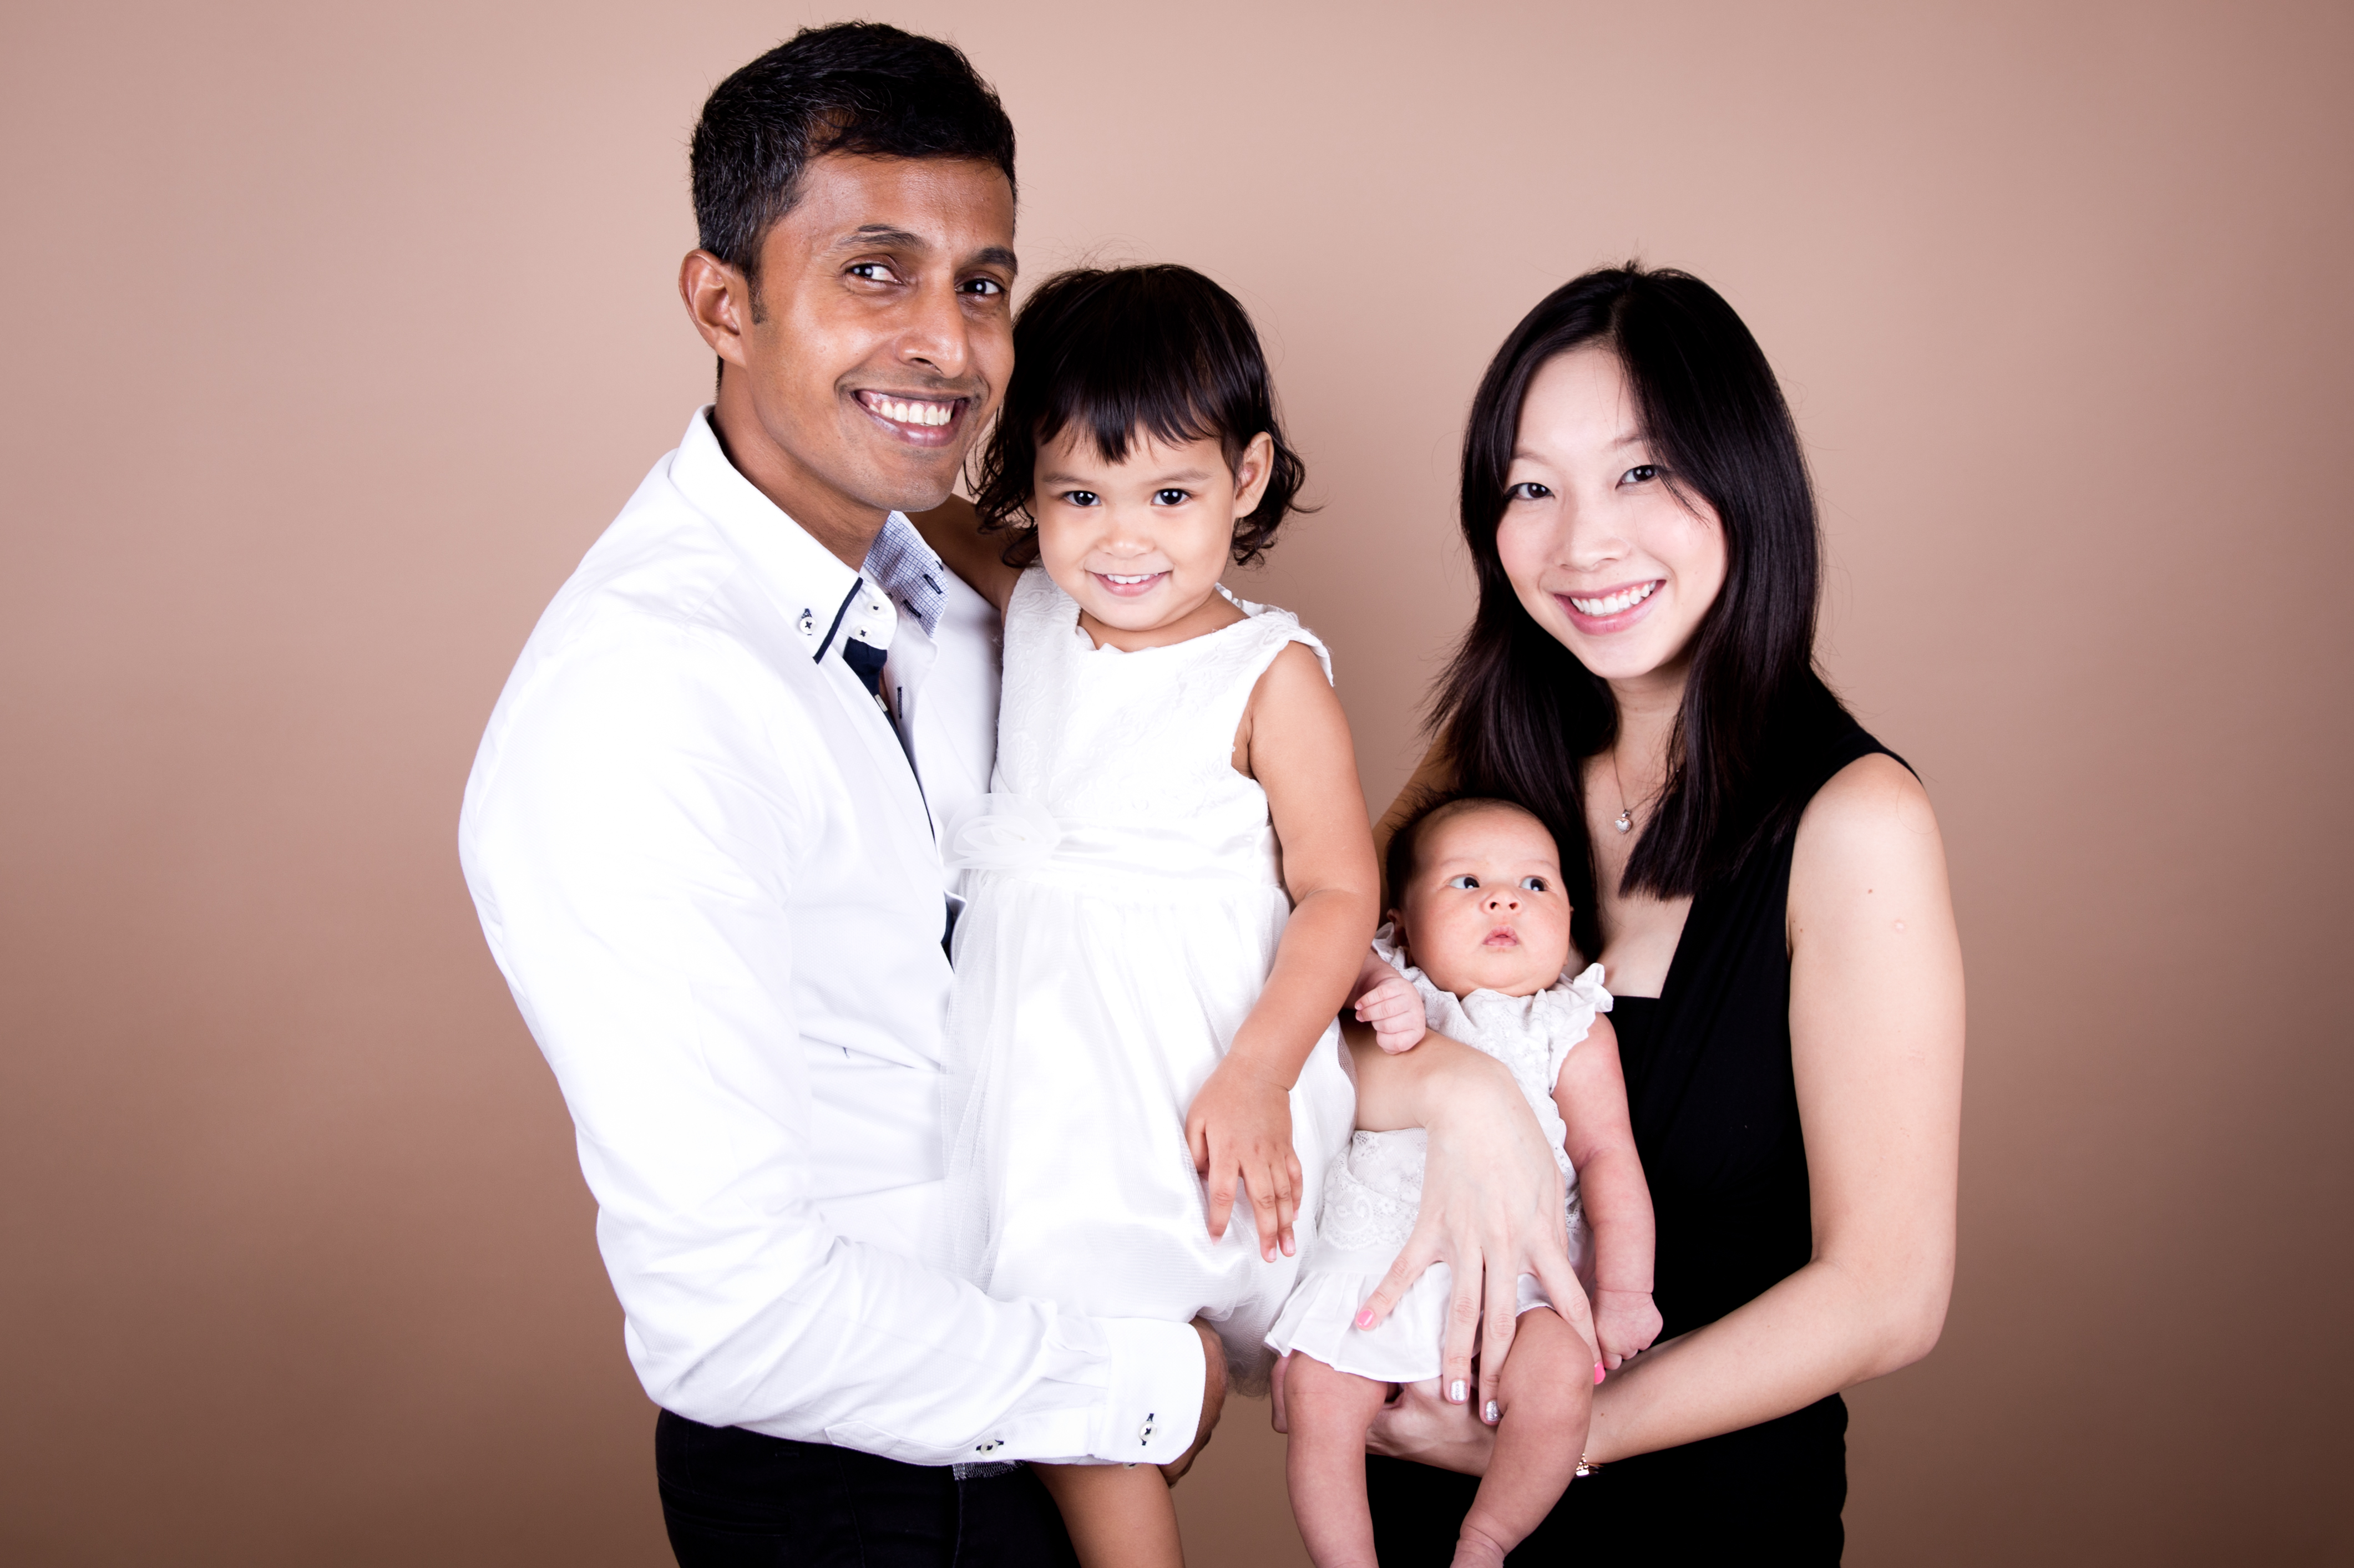 race white Asian indian inter couple photo